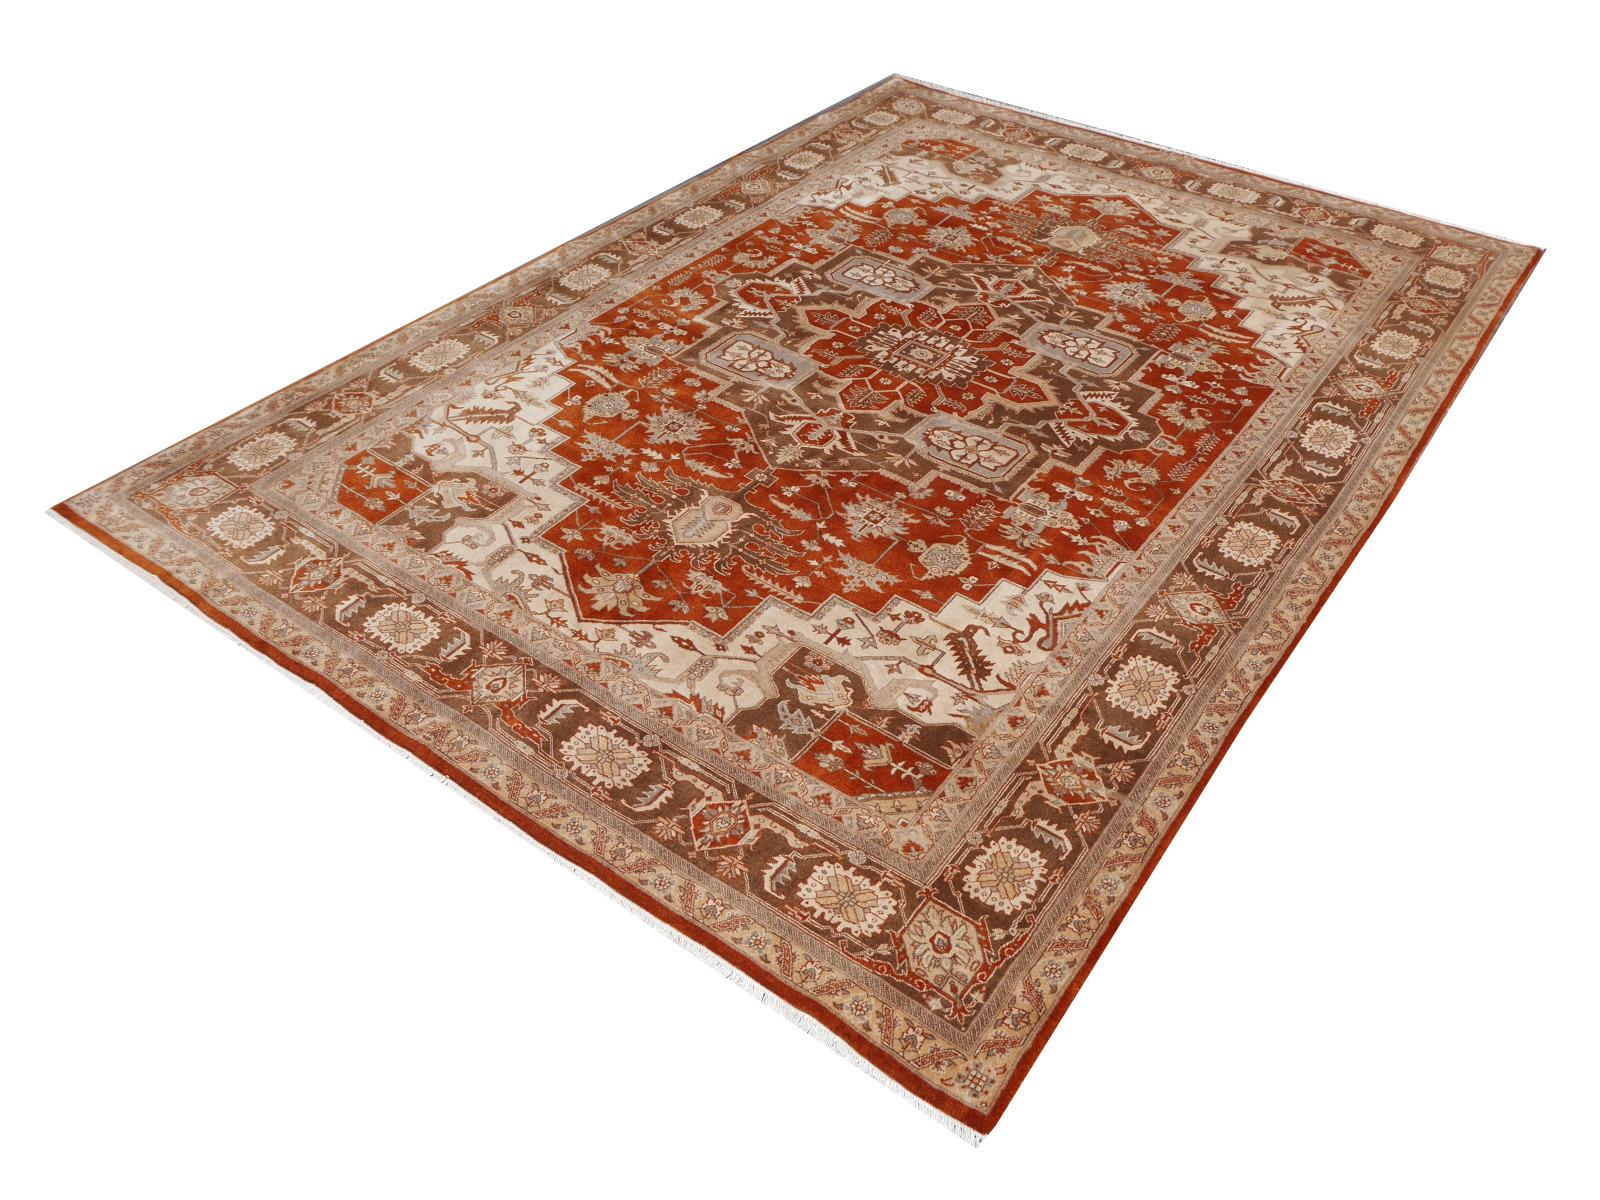 A beautiful new 21 century rug with Serapi design, hand knotted using finest Highland Wool.
 
Construction
This artwork has a pile made of fine spun Wool. The rug is very dense and has a pile height of about 0.5 inch.
Production
We have a